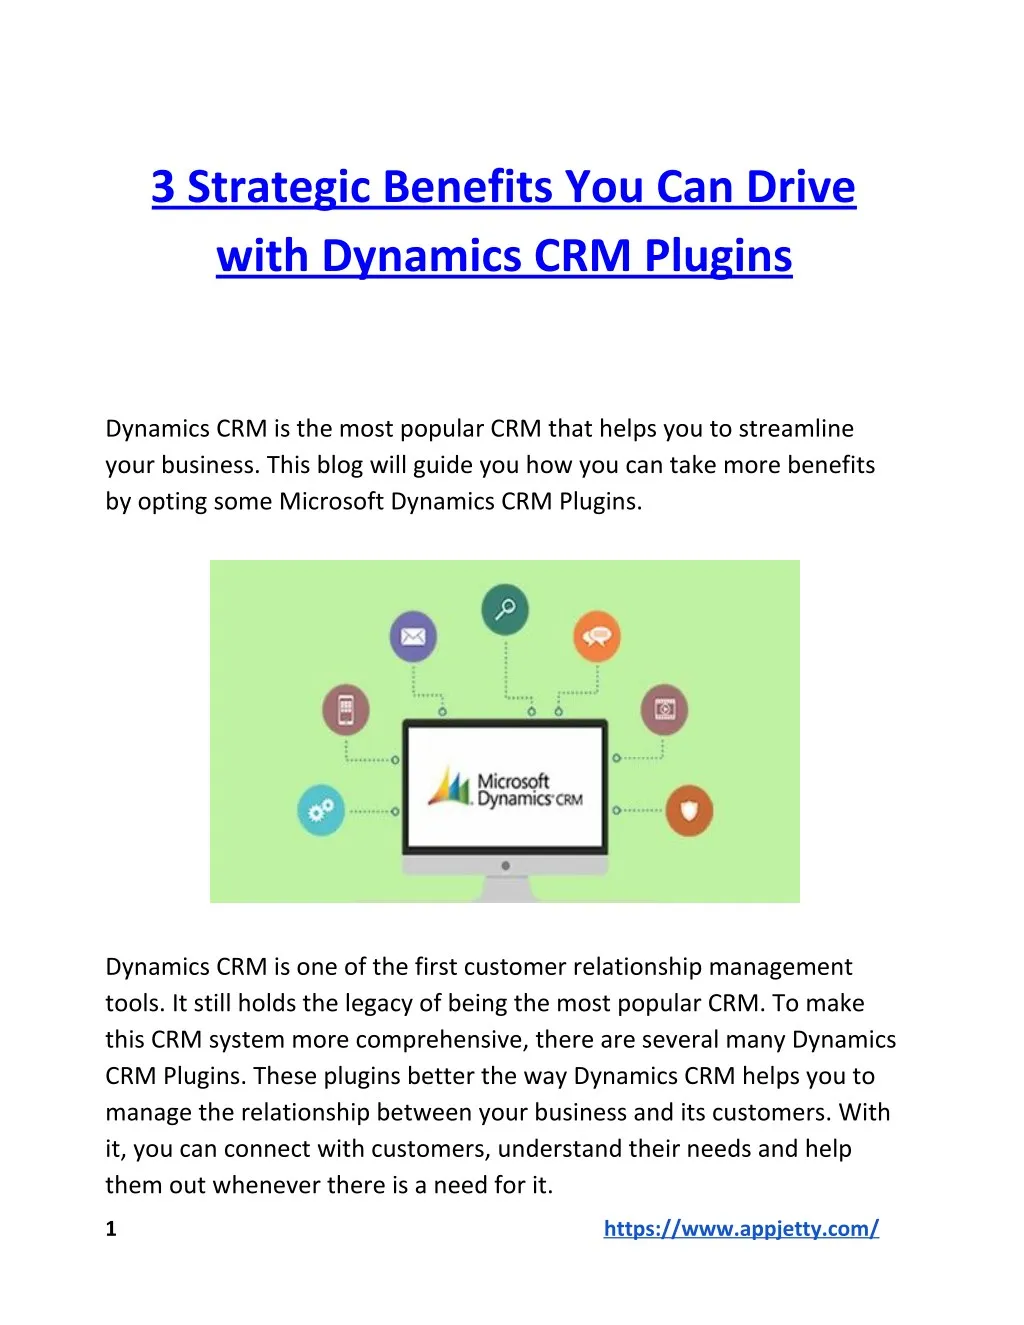 3 strategic benefits you can drive with dynamics